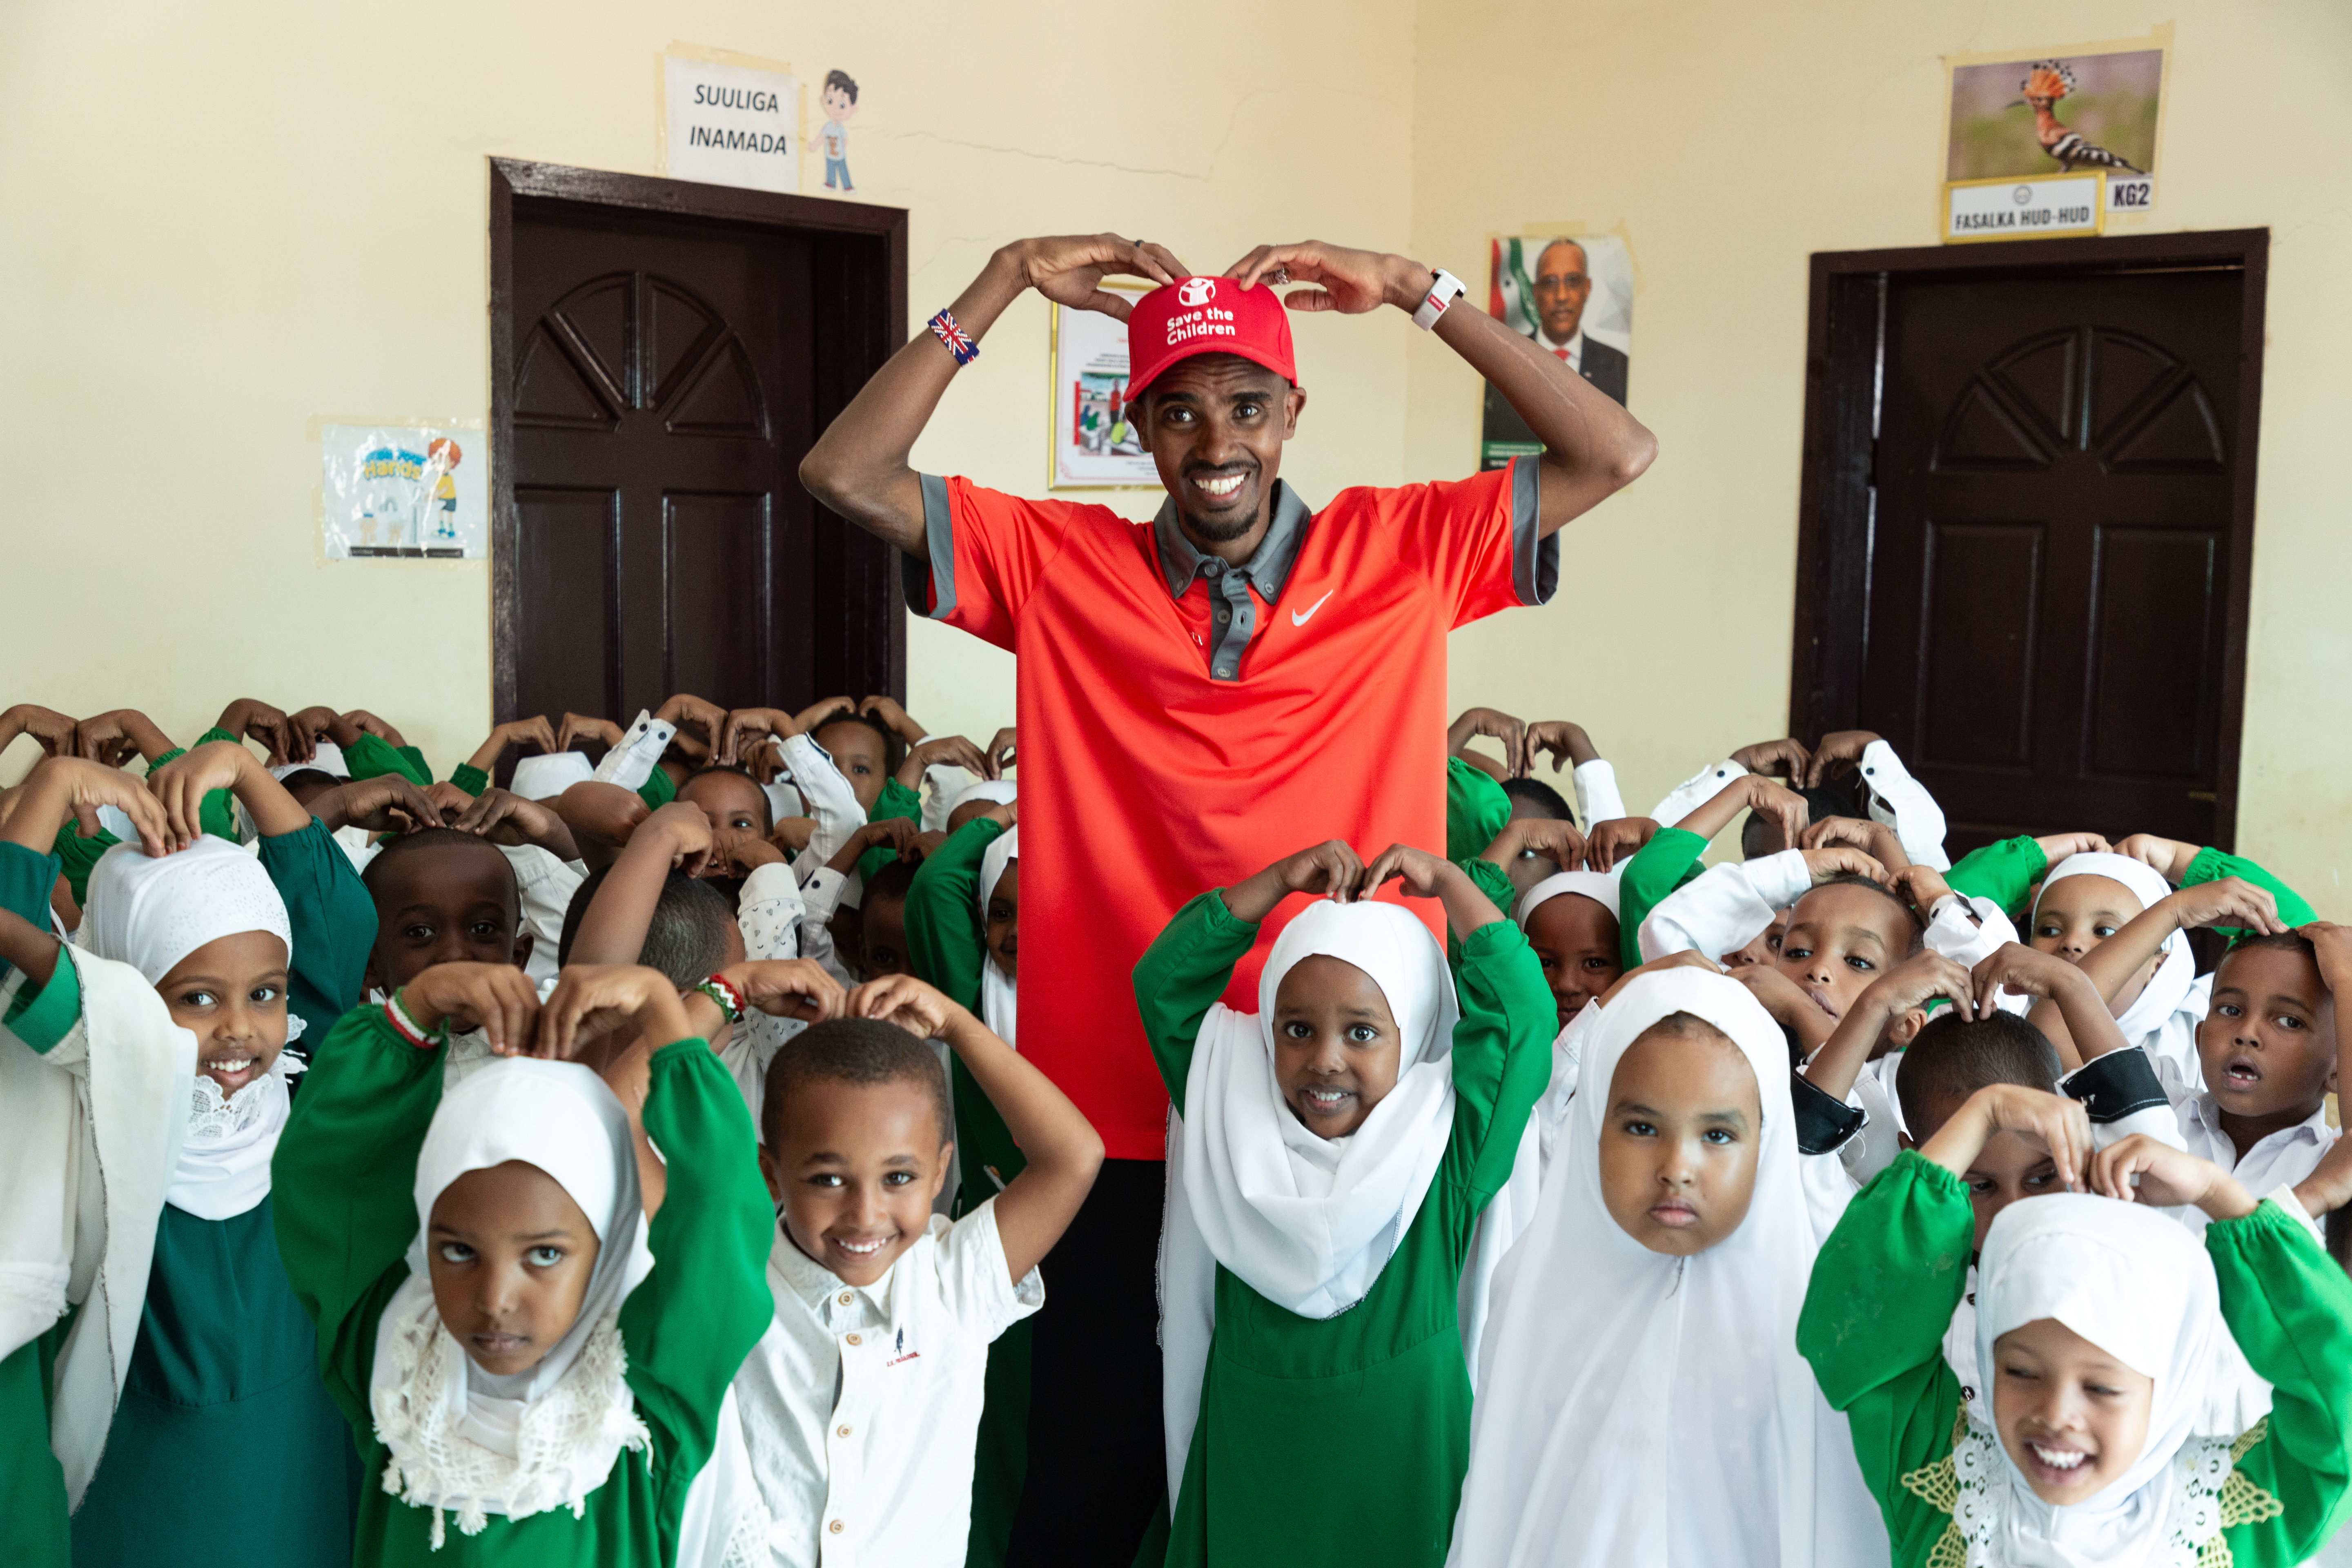 Sir Mo Farah, wearing a re Save the Children cap, does the Mobot pose with schoolchildren dressed in green and white in Somaliland